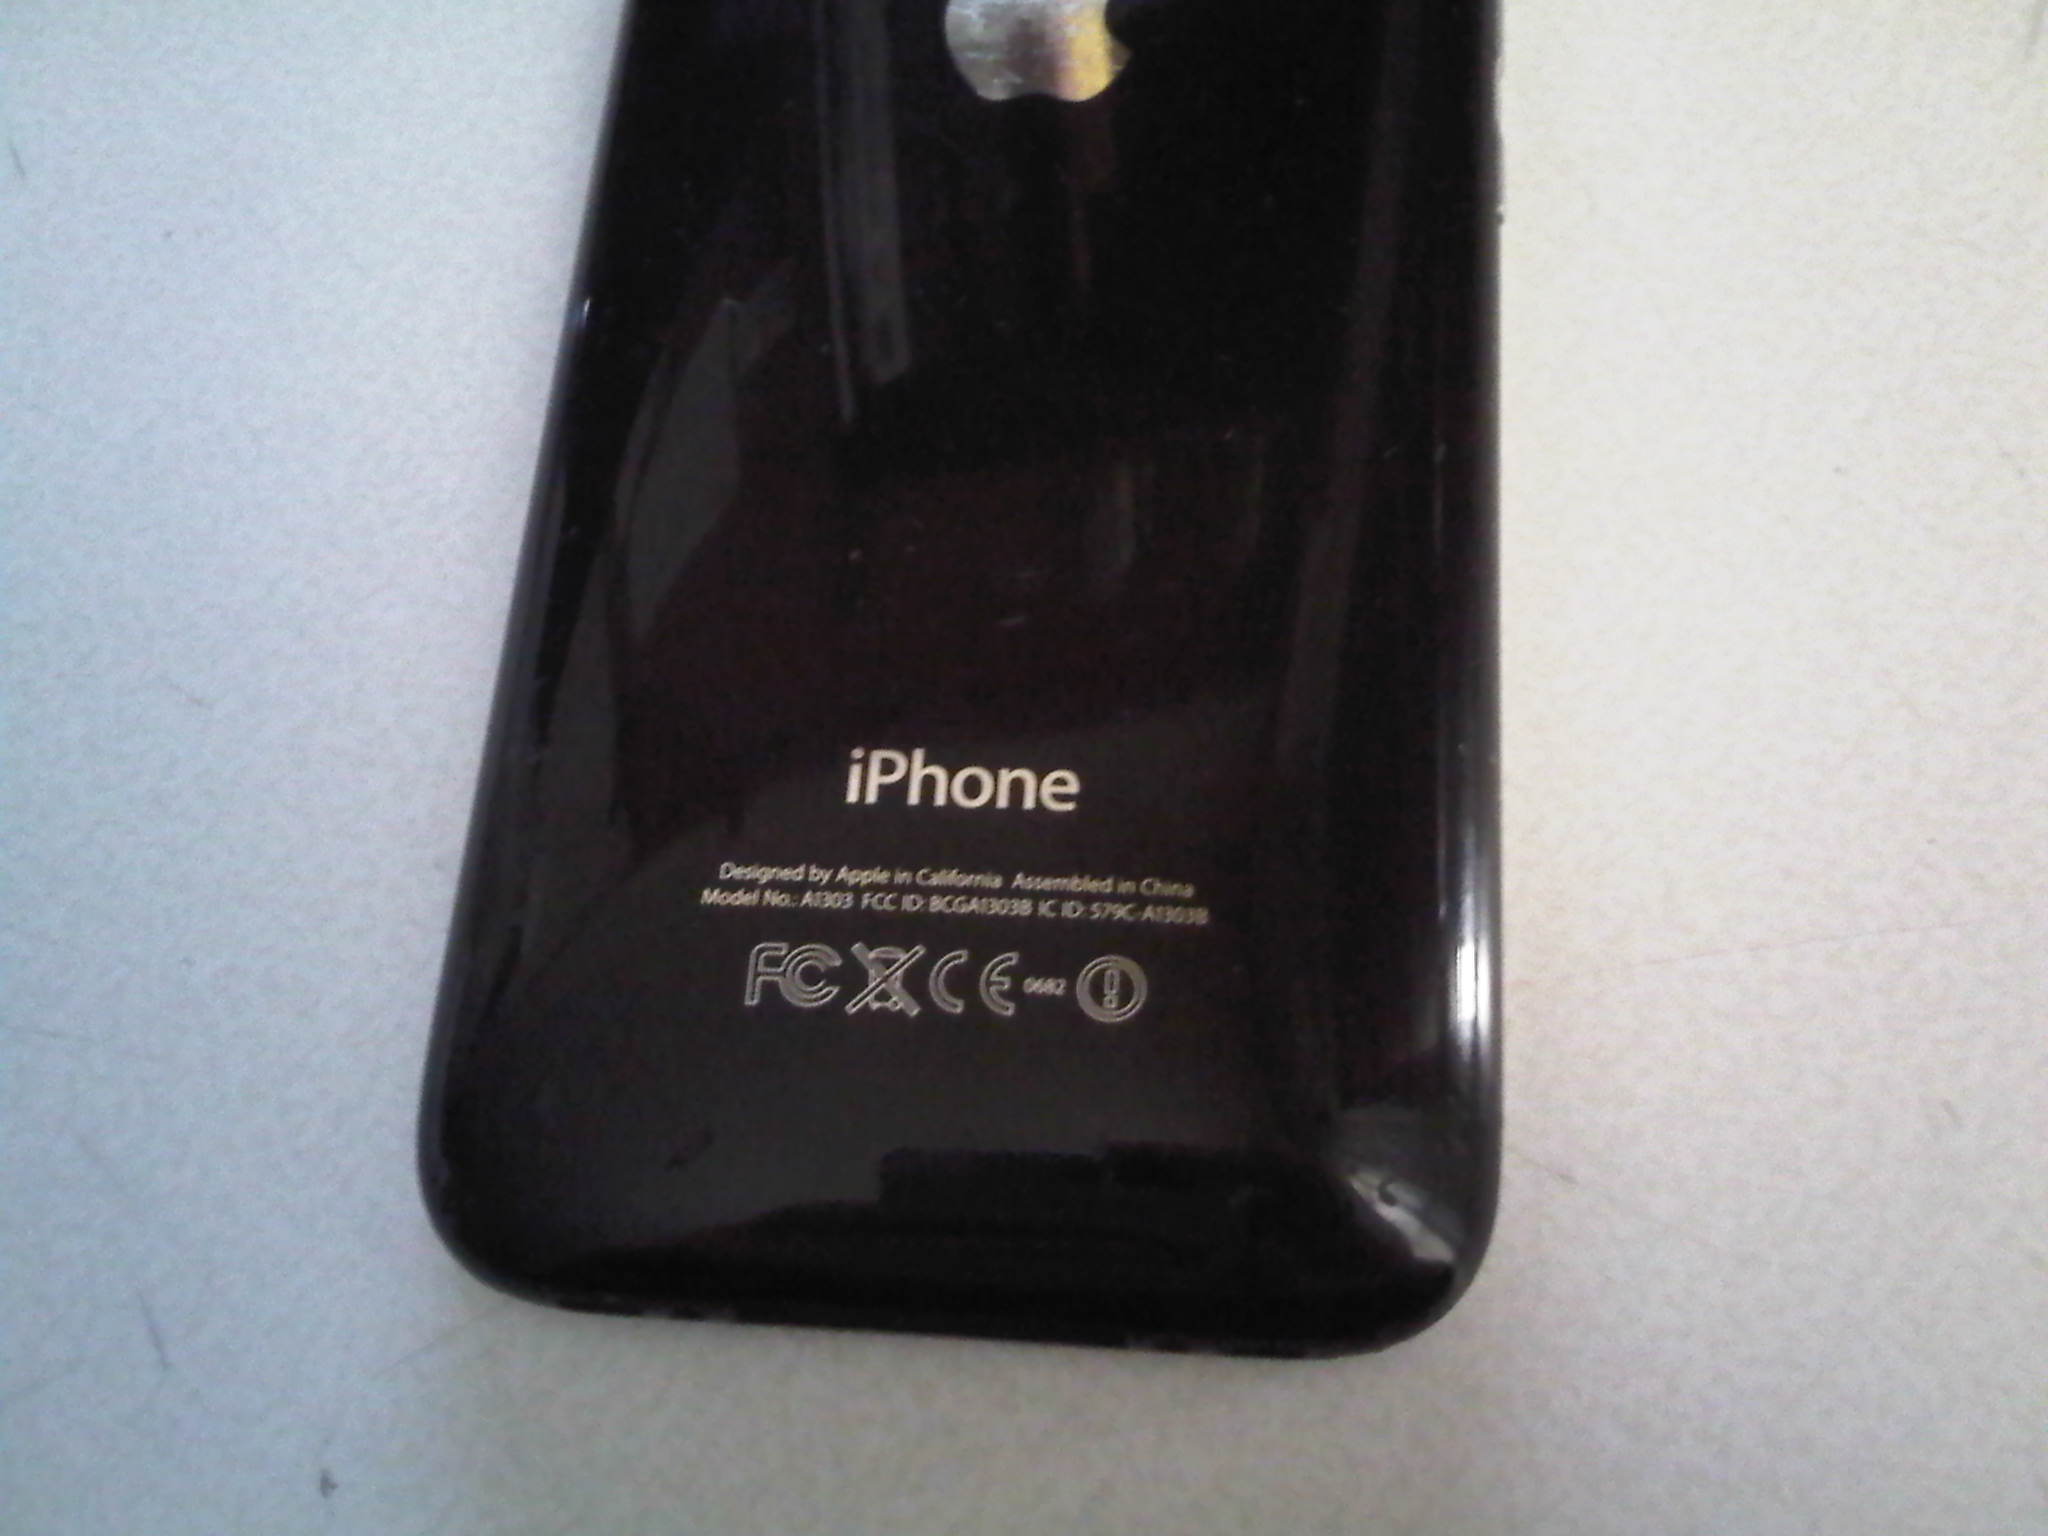 inspanning Foto Kwelling Iphone 3gs back weird? | MacRumors Forums